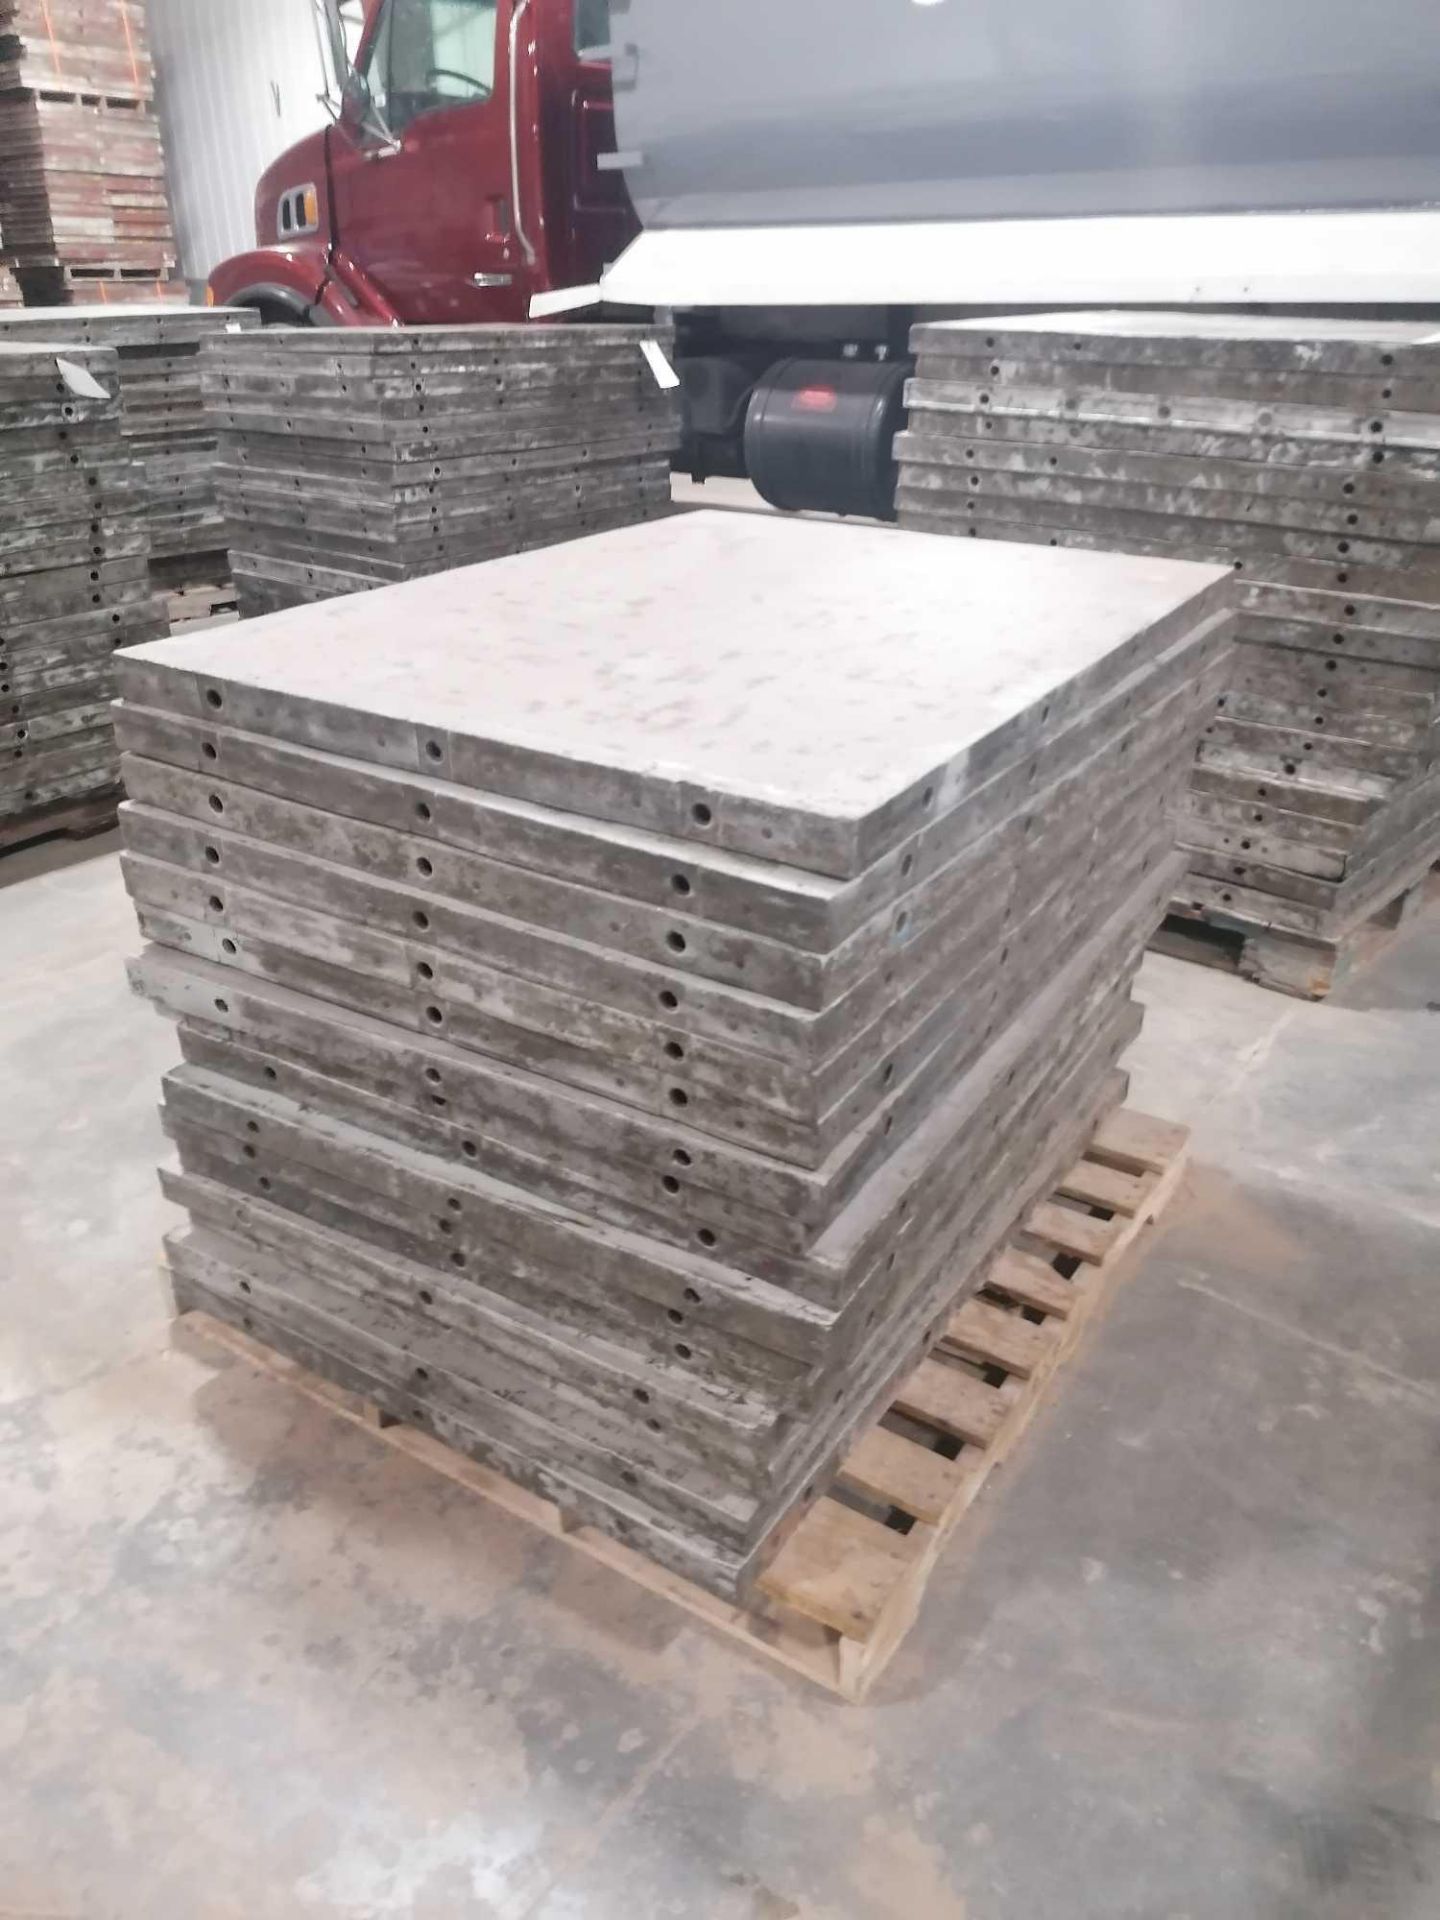 (16) 36" x 4' Western Aluminum Concrete Forms, Smooth 6-12 Hole Pattern. Located at 119 Spruce